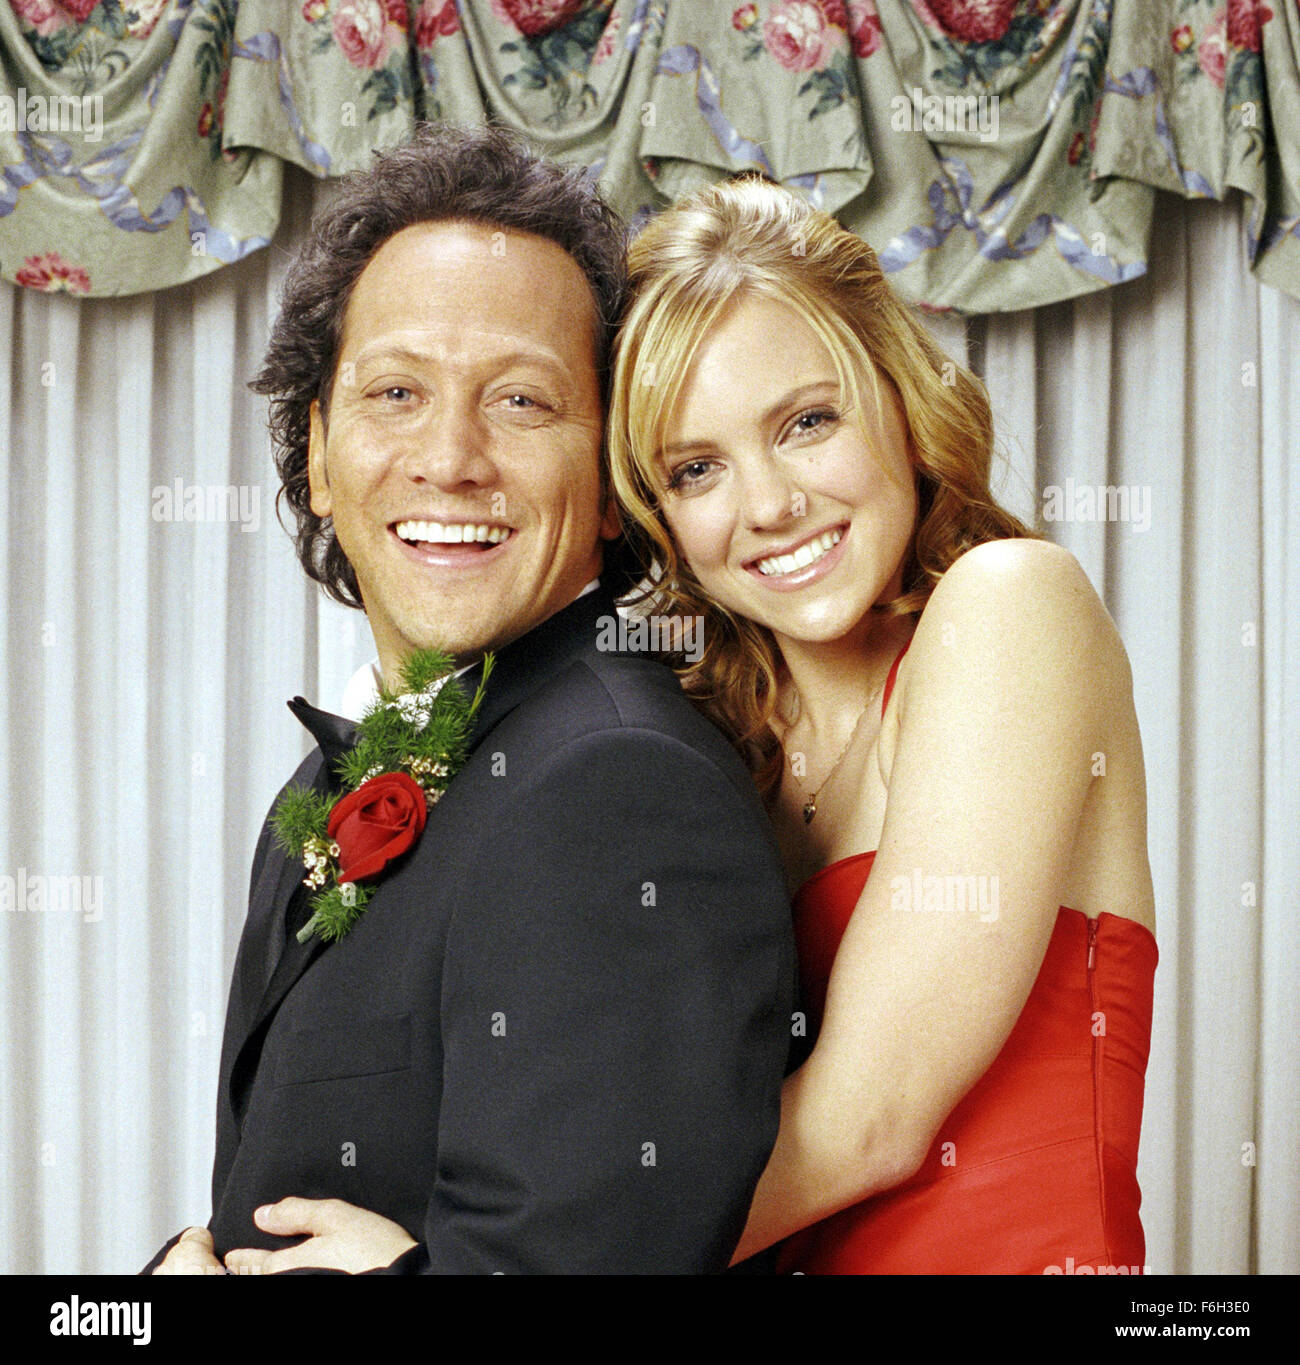 Apr 20, 2002; Hollywood, CA, USA; Actors ROB SCHNEIDER as Jessica and ANNA FARIS as APRIL in the comedy 'The Hot Chick' directed  by Tom Brady. Stock Photo